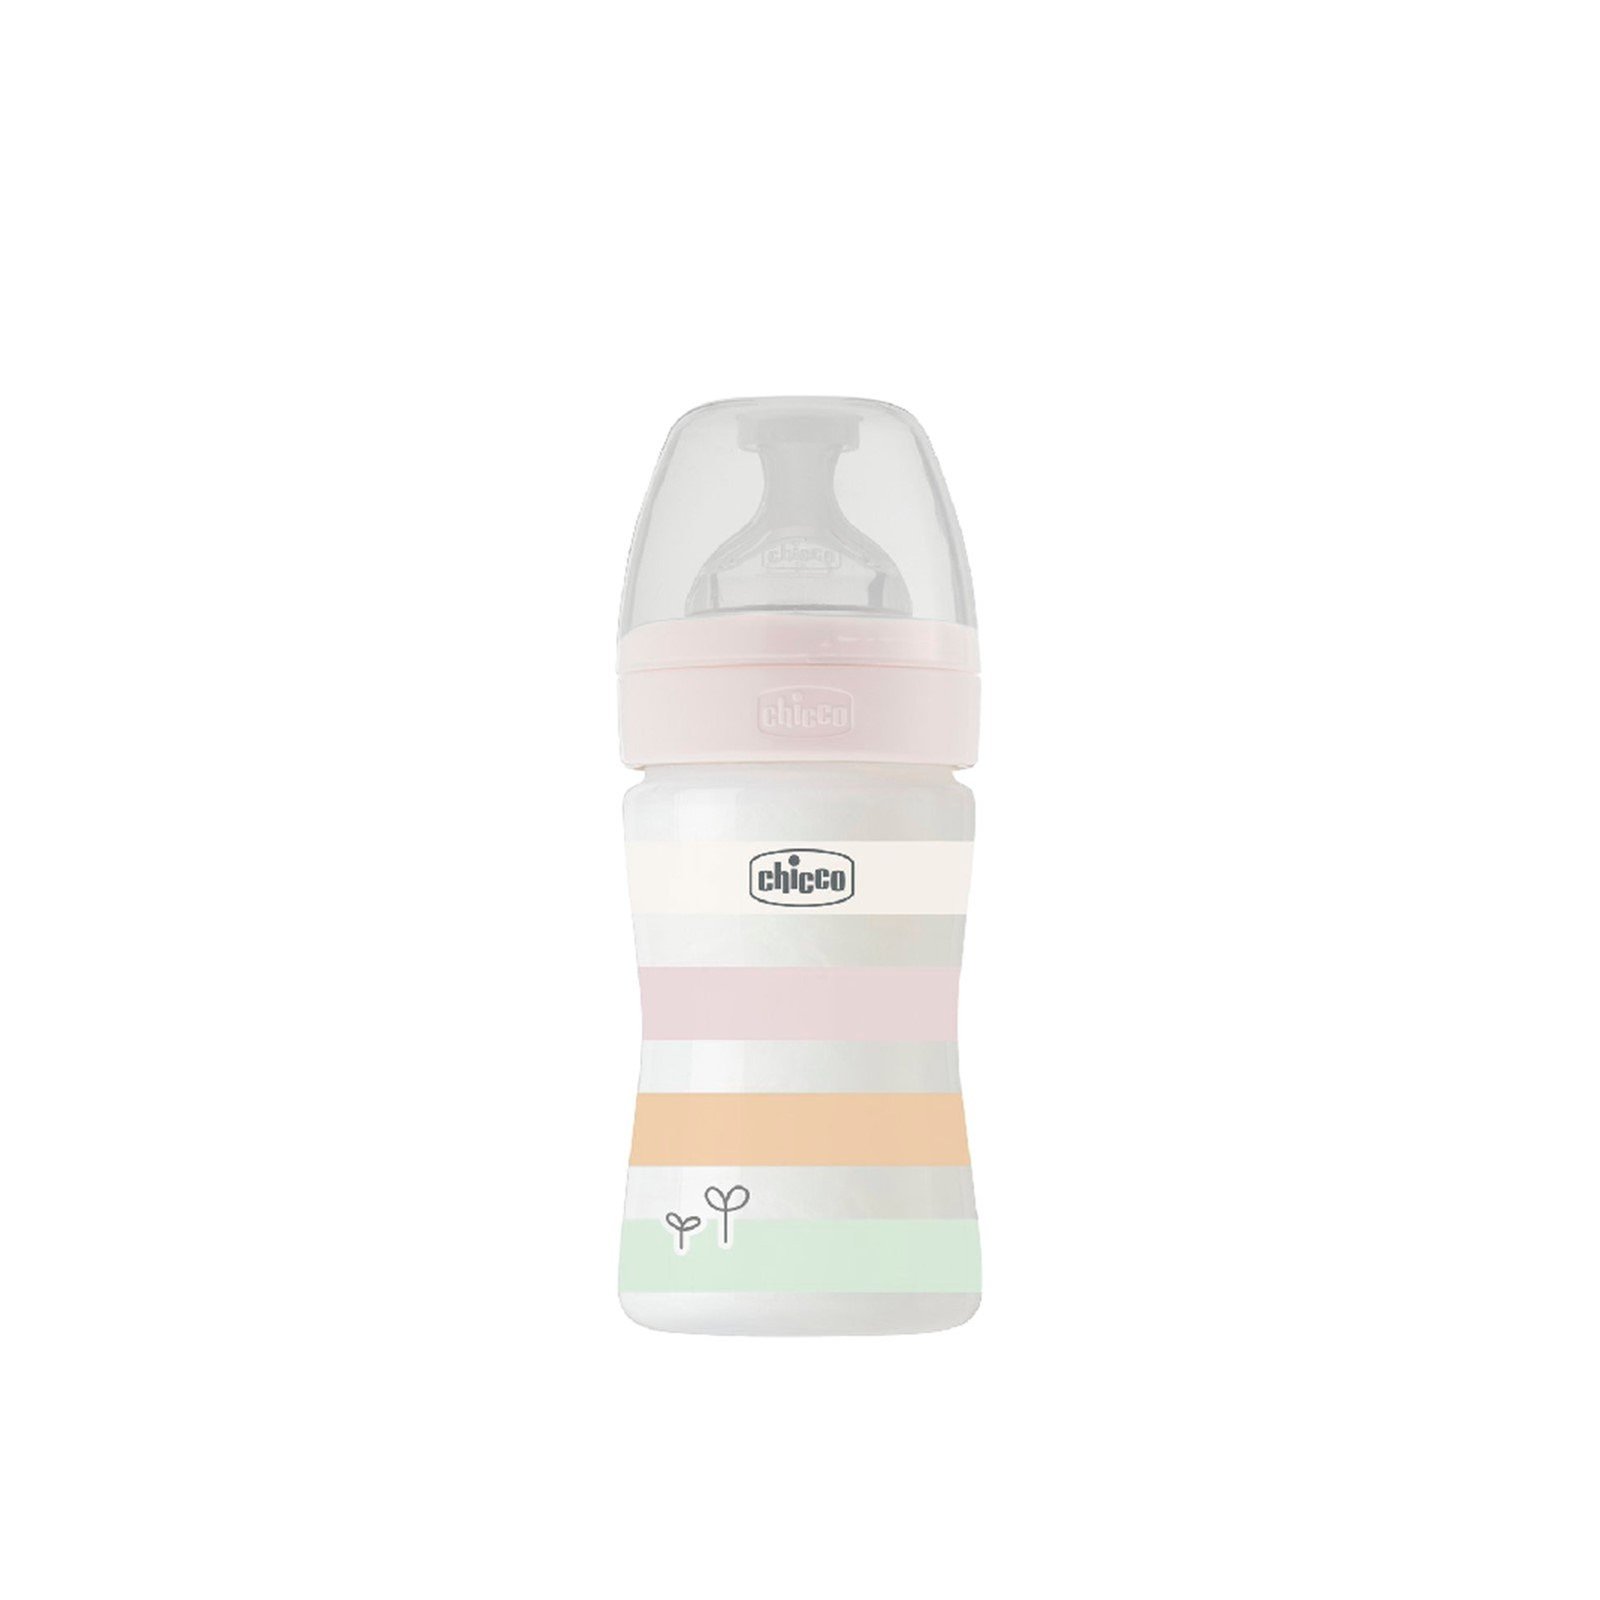 Chicco Well-Being Colors Bottle 0m+ White 150ml (5 fl oz)